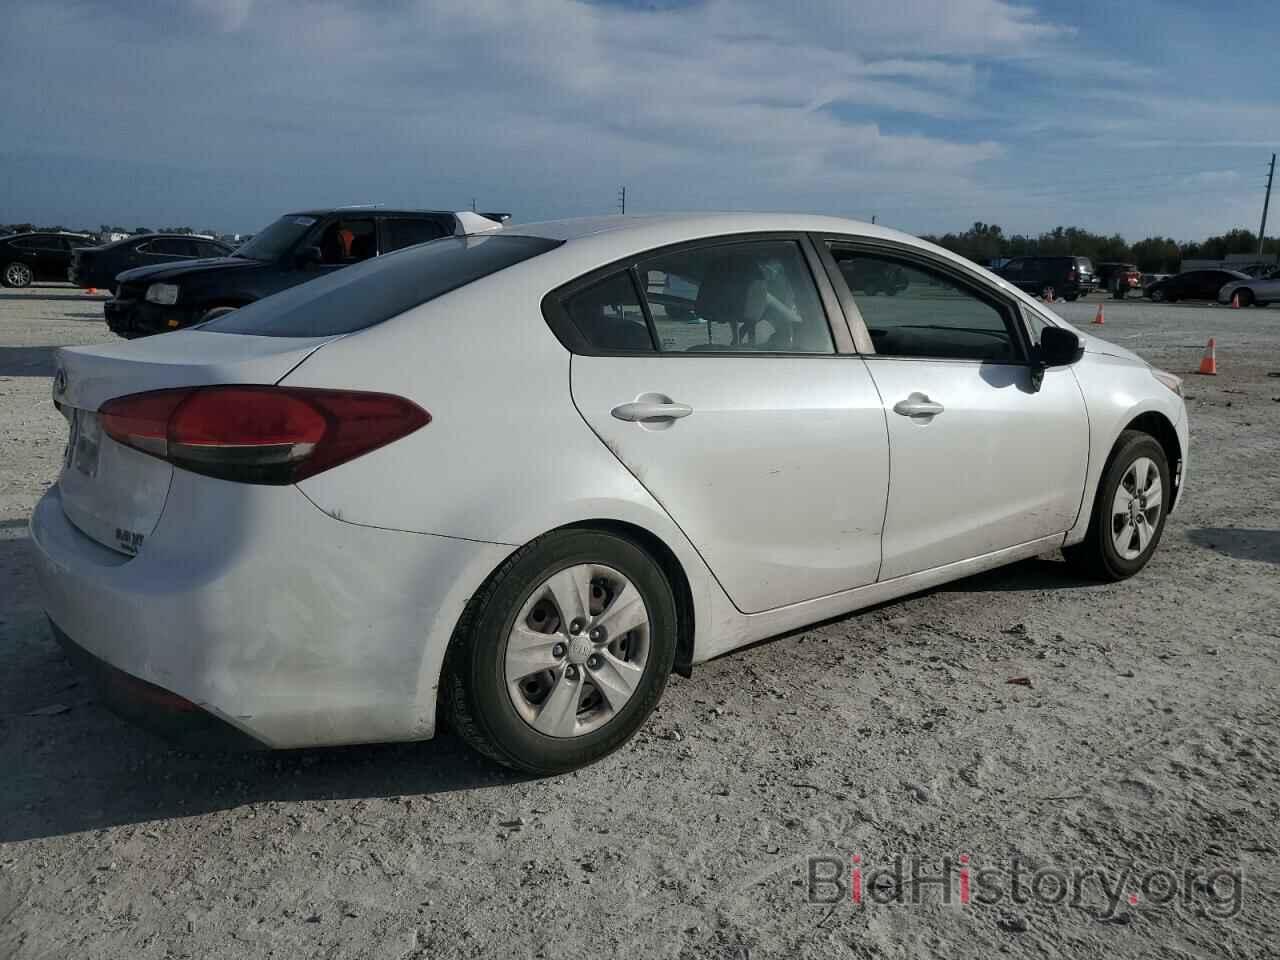 Report 3KPFL4A72HE103279 KIA FORTE 2017 WHITE GAS - price and damage ...